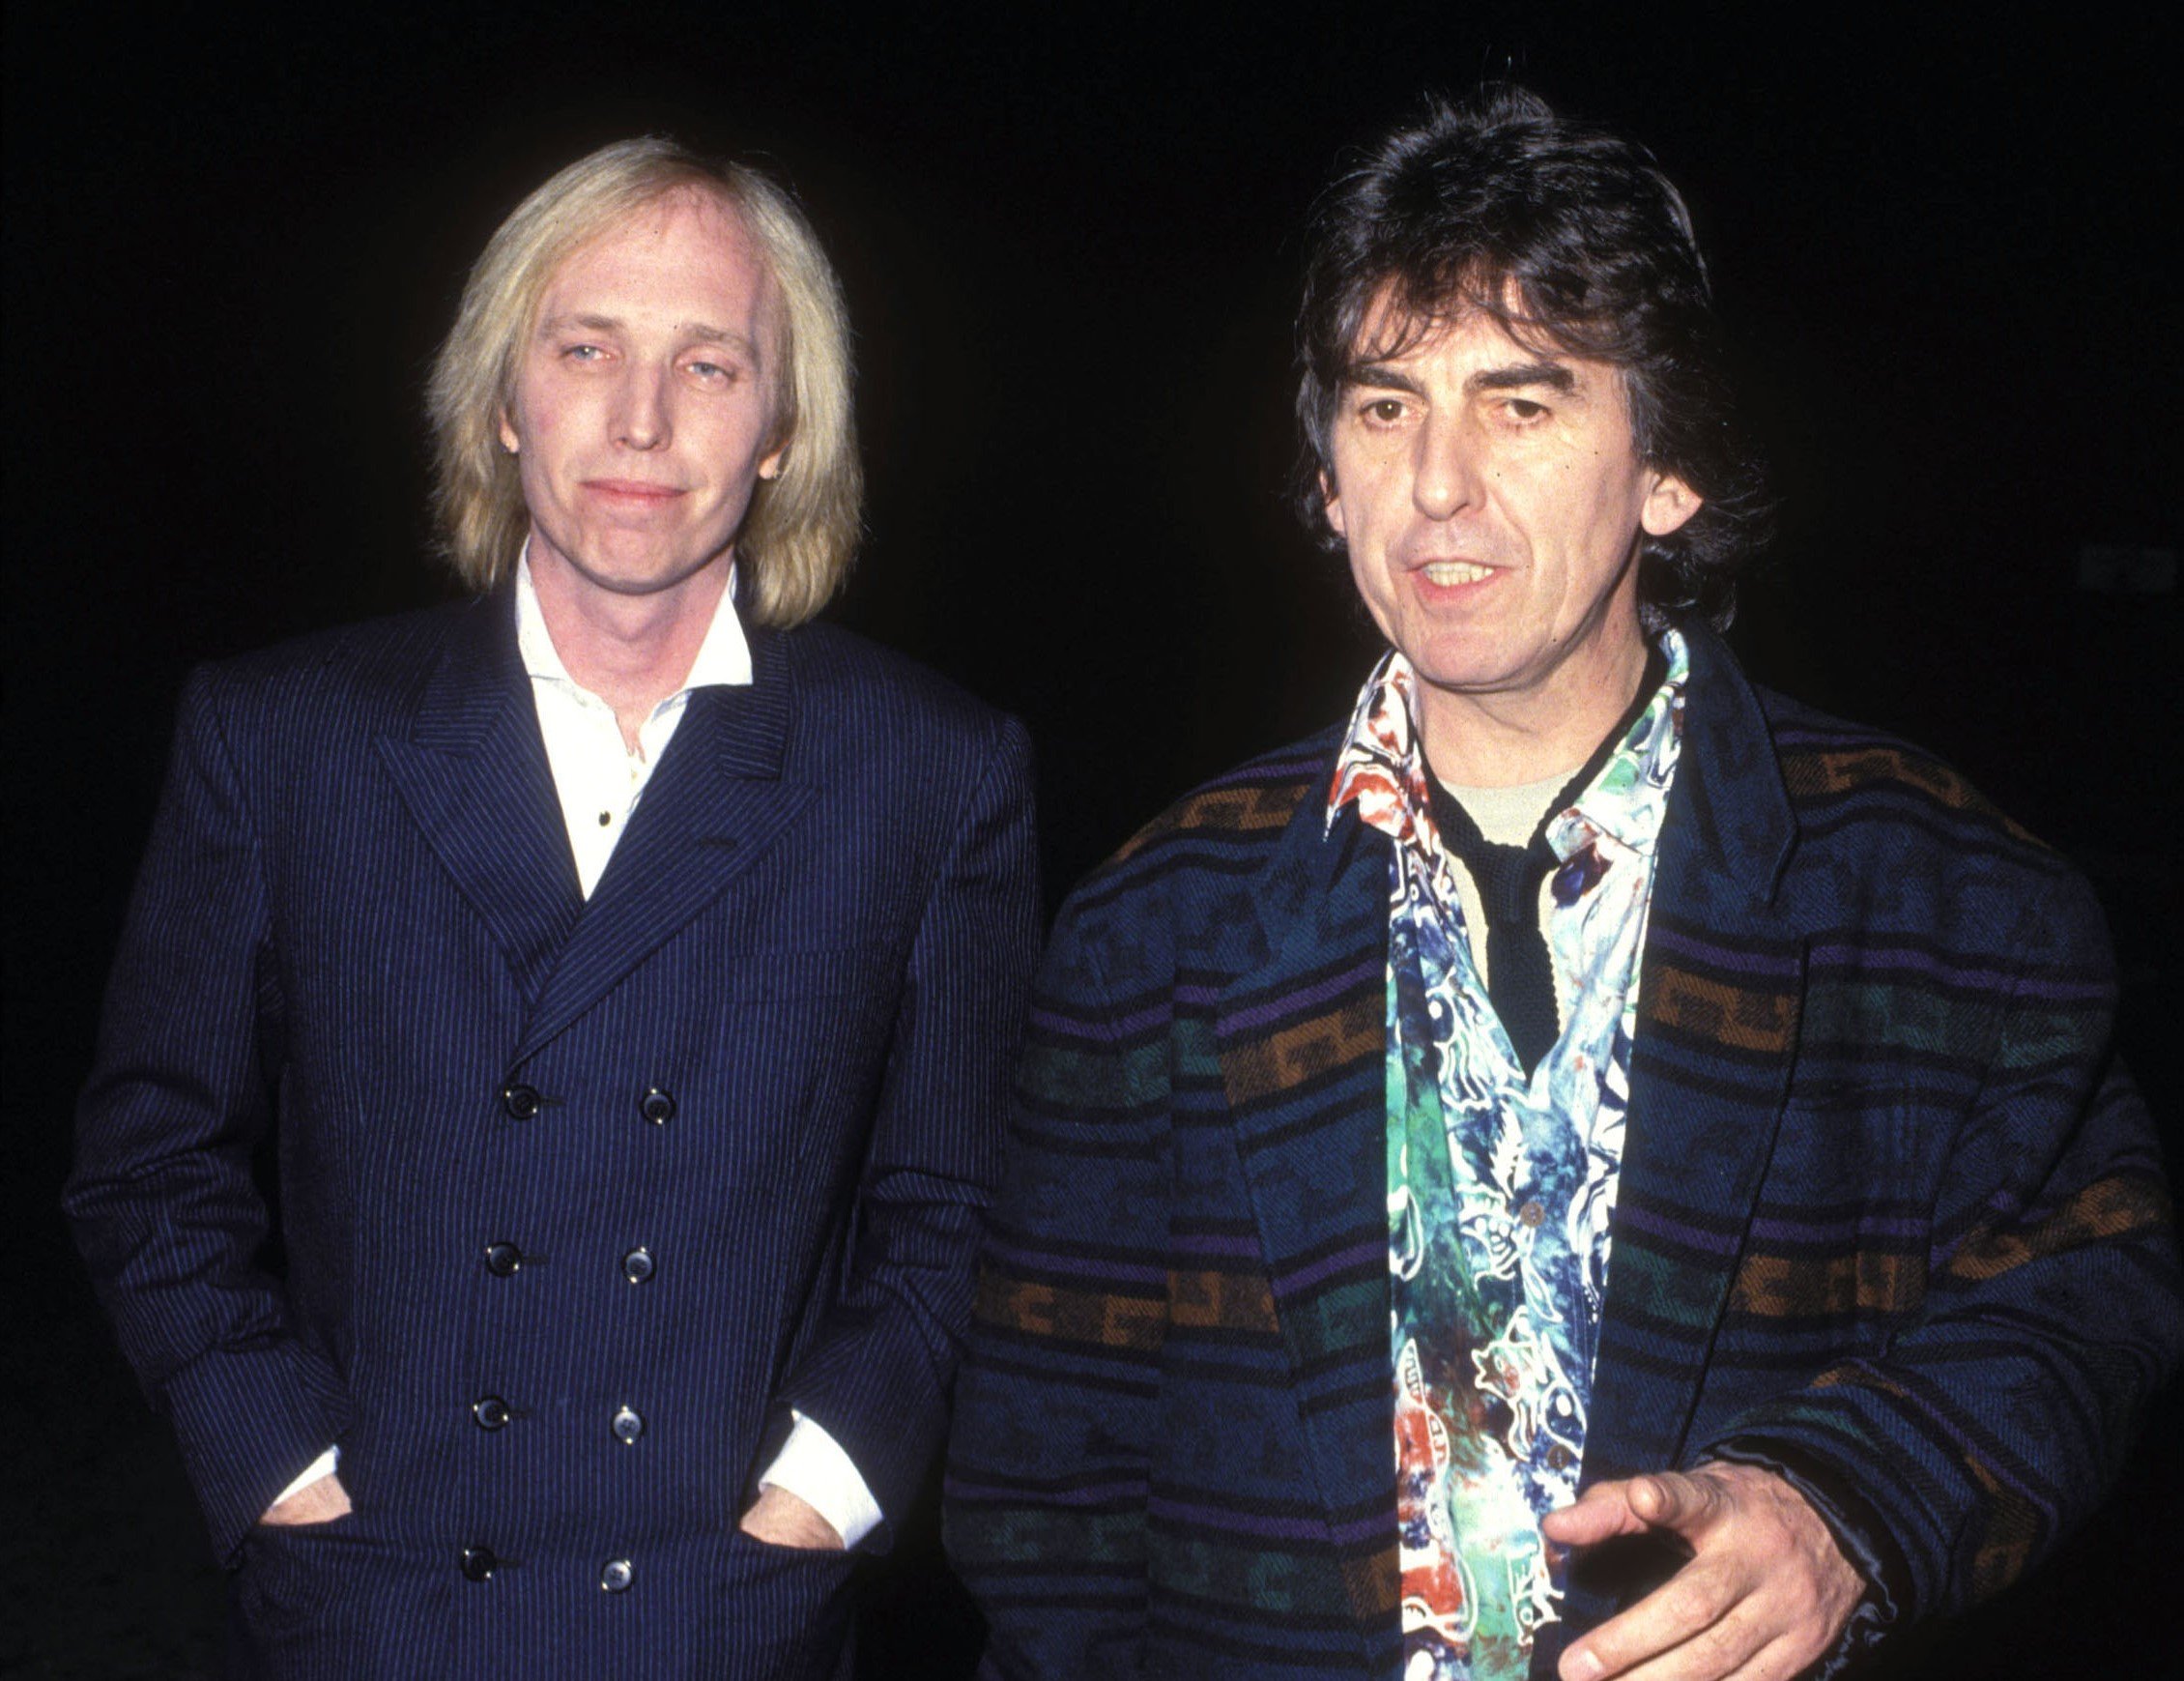 Tom Petty and George Harrison wear jackets and walk outdoors at night.